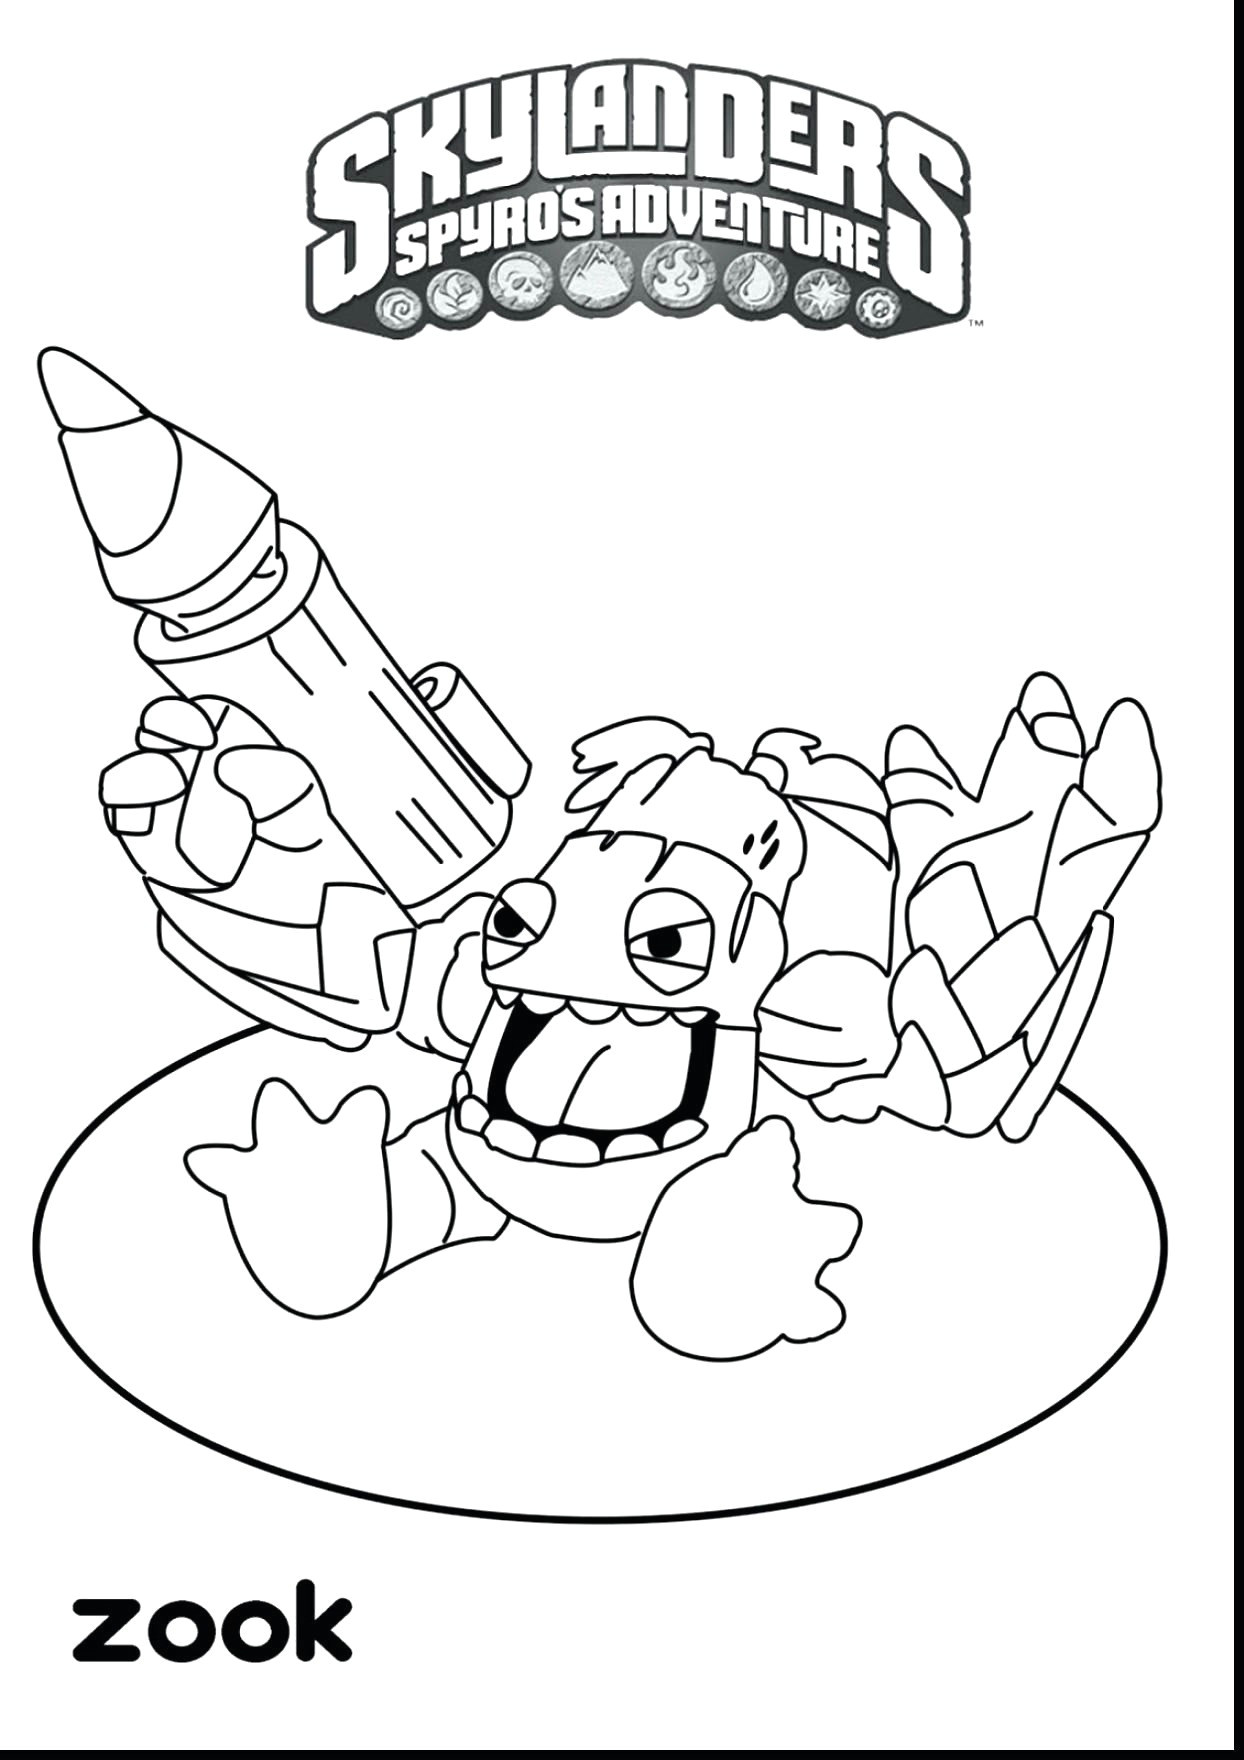 Easy Drawings with Color Easy to Draw Instruments Home Coloring Pages Best Color Sheet 0d